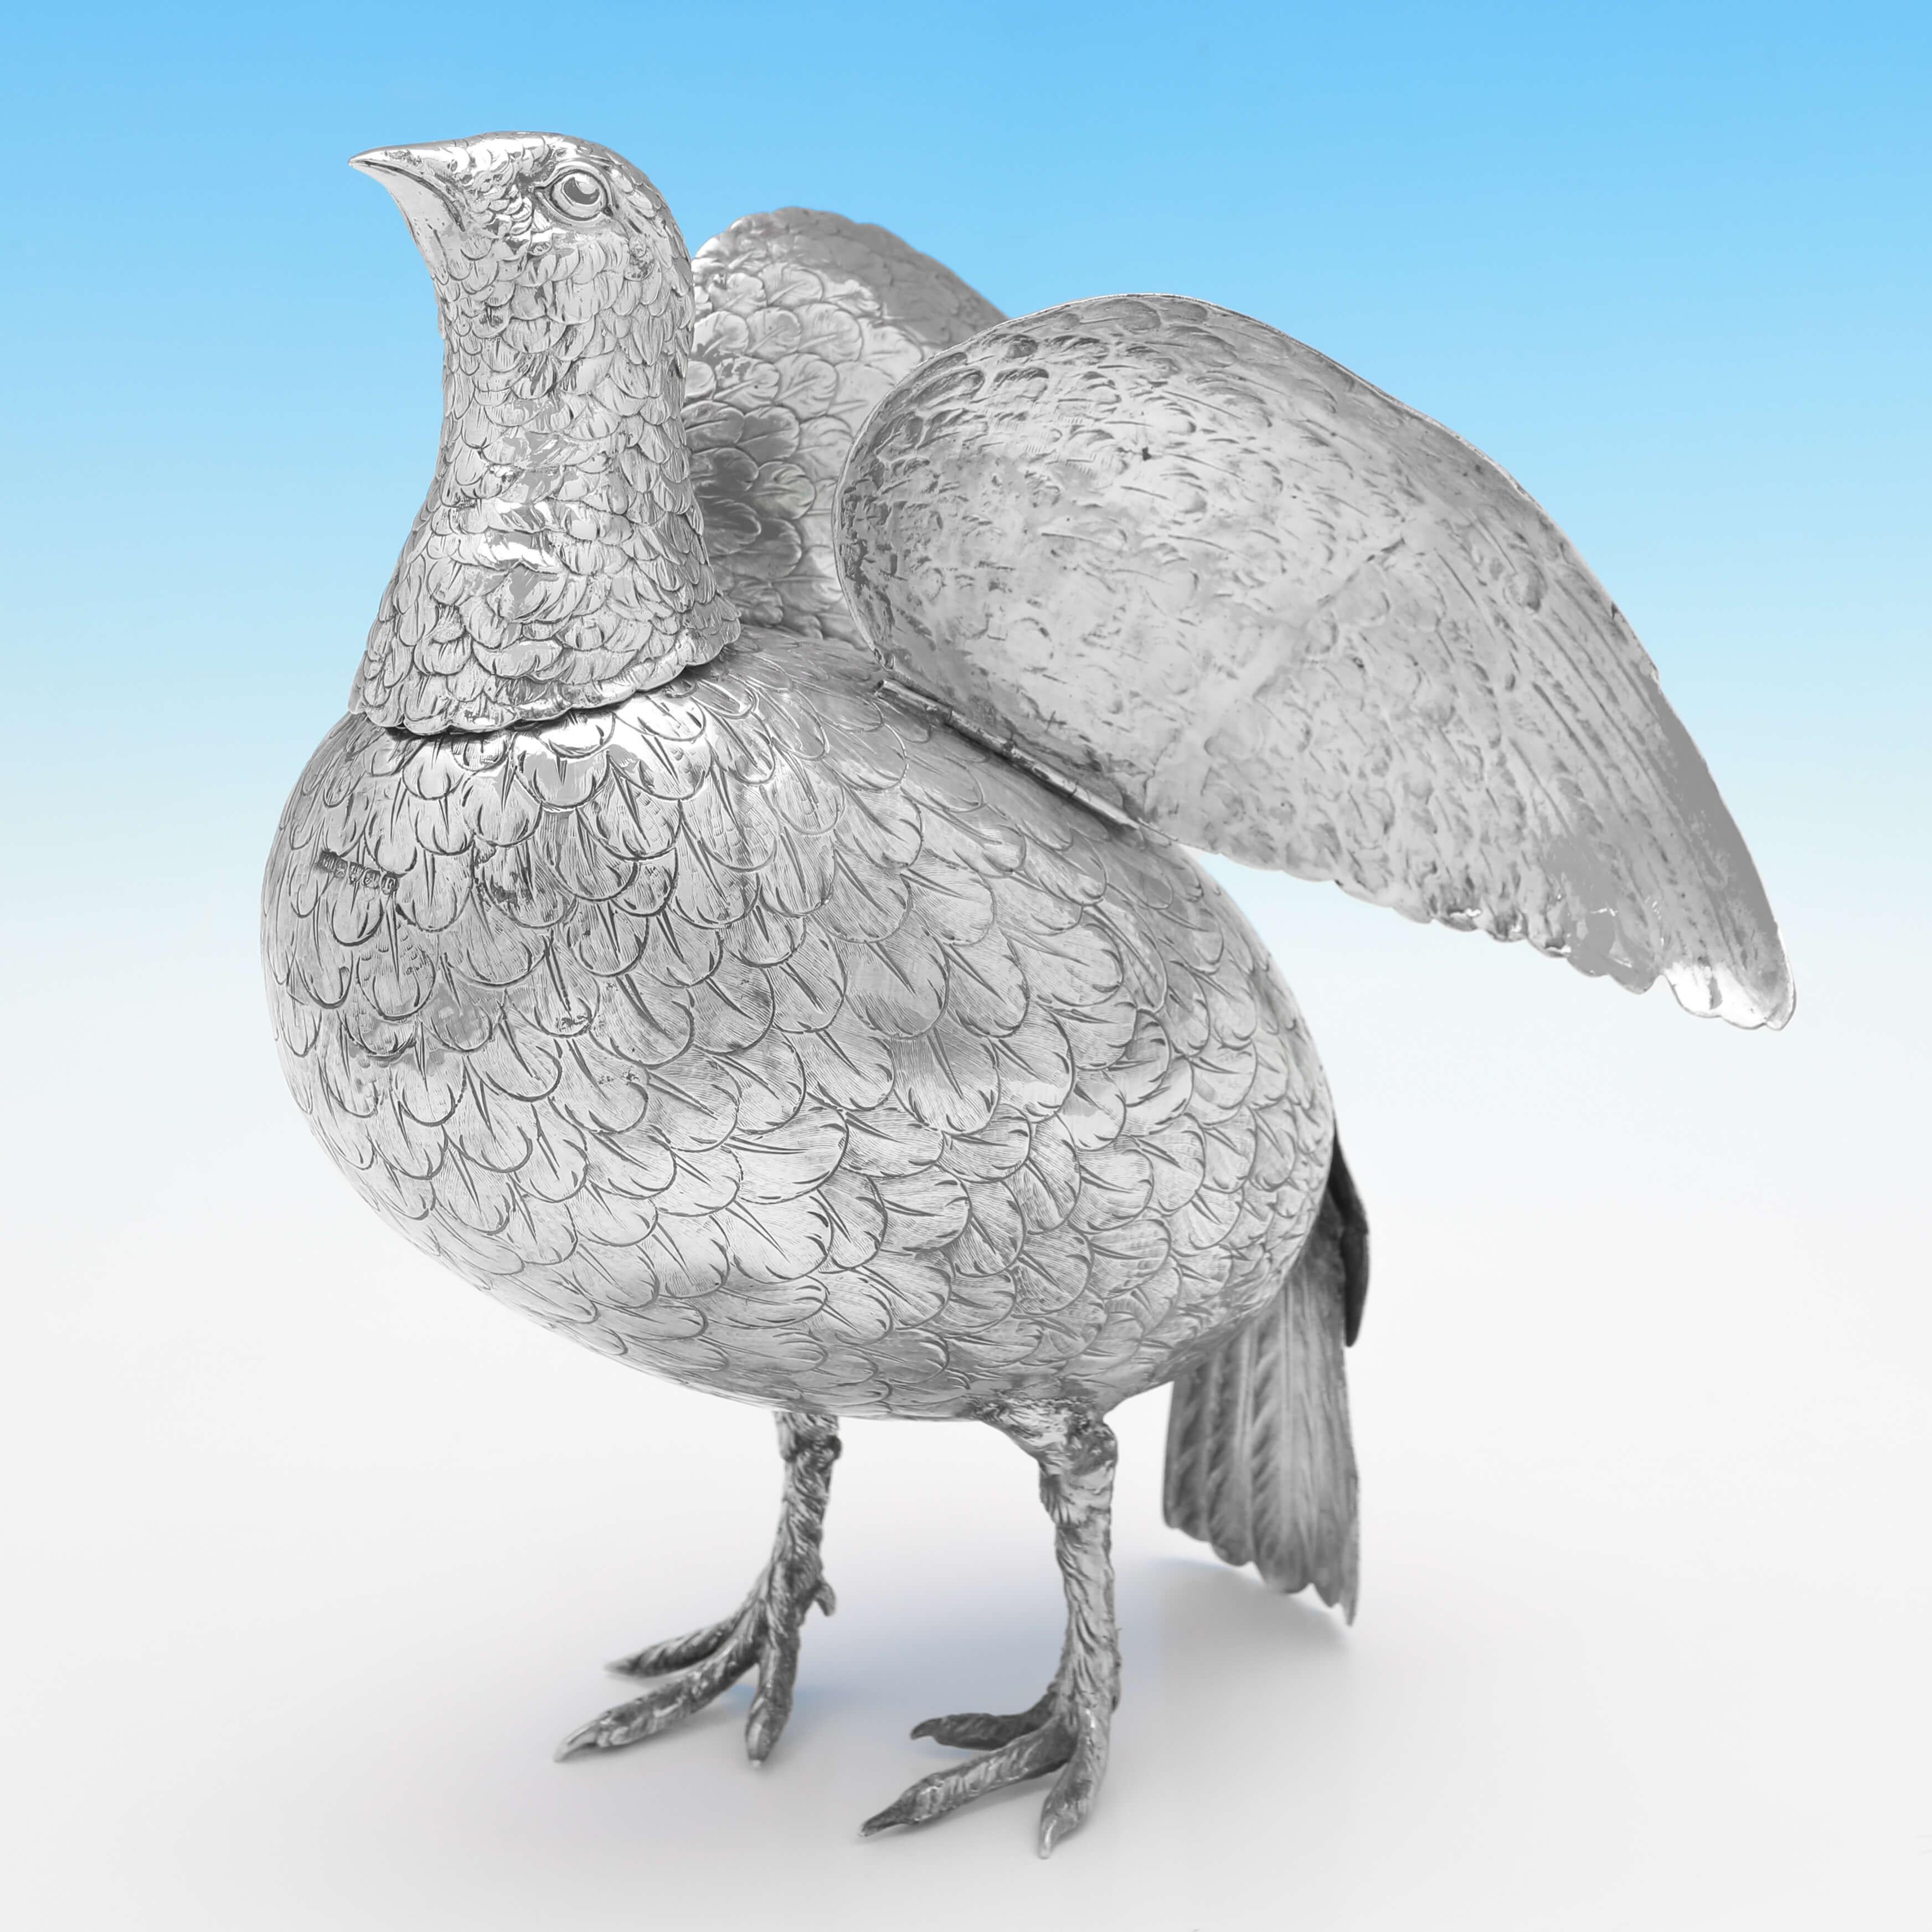 Carrying import marks for Chester in 1901 by Berthold Muller, this charming, Antique Sterling Silver Model of a Partridge, has a removable head, and moveable wings. 

The partridge measures 11